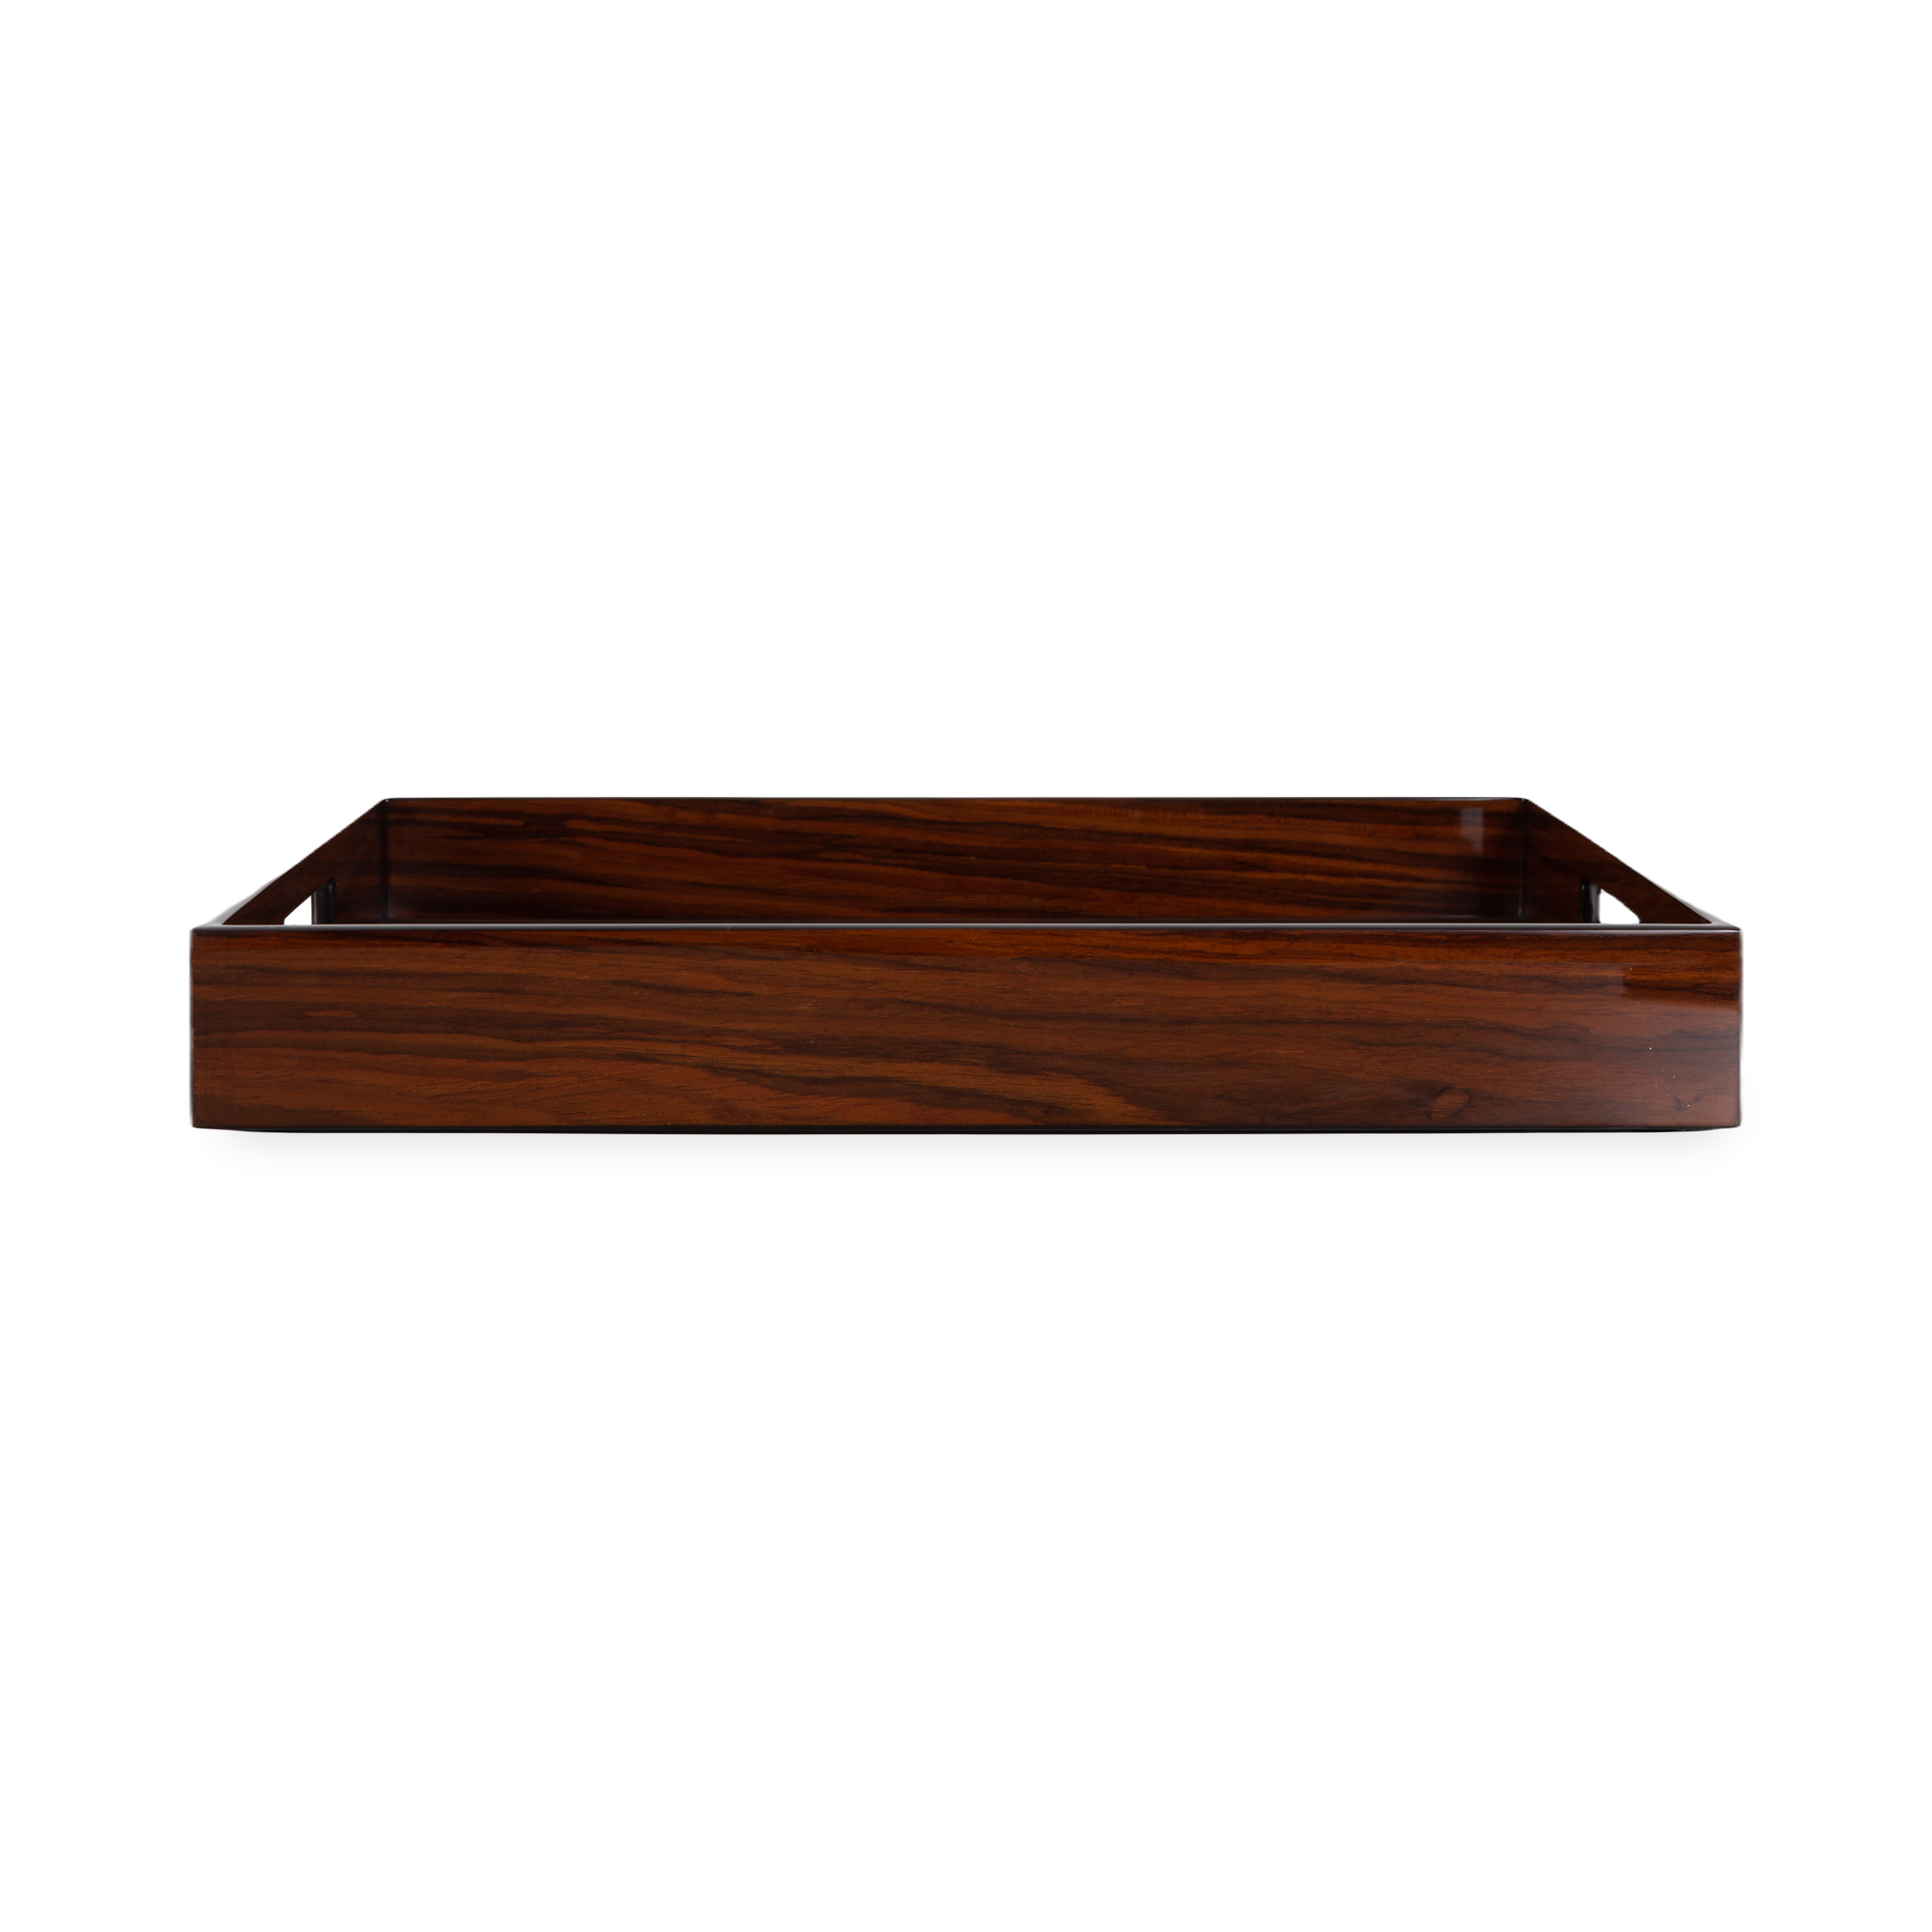 The Laquered Rosewood Tray uses hand-crafted lacquered wood that is produced by the traditional method of hand-pouring multiple layers of lacquer and hand-polishing each layer, res